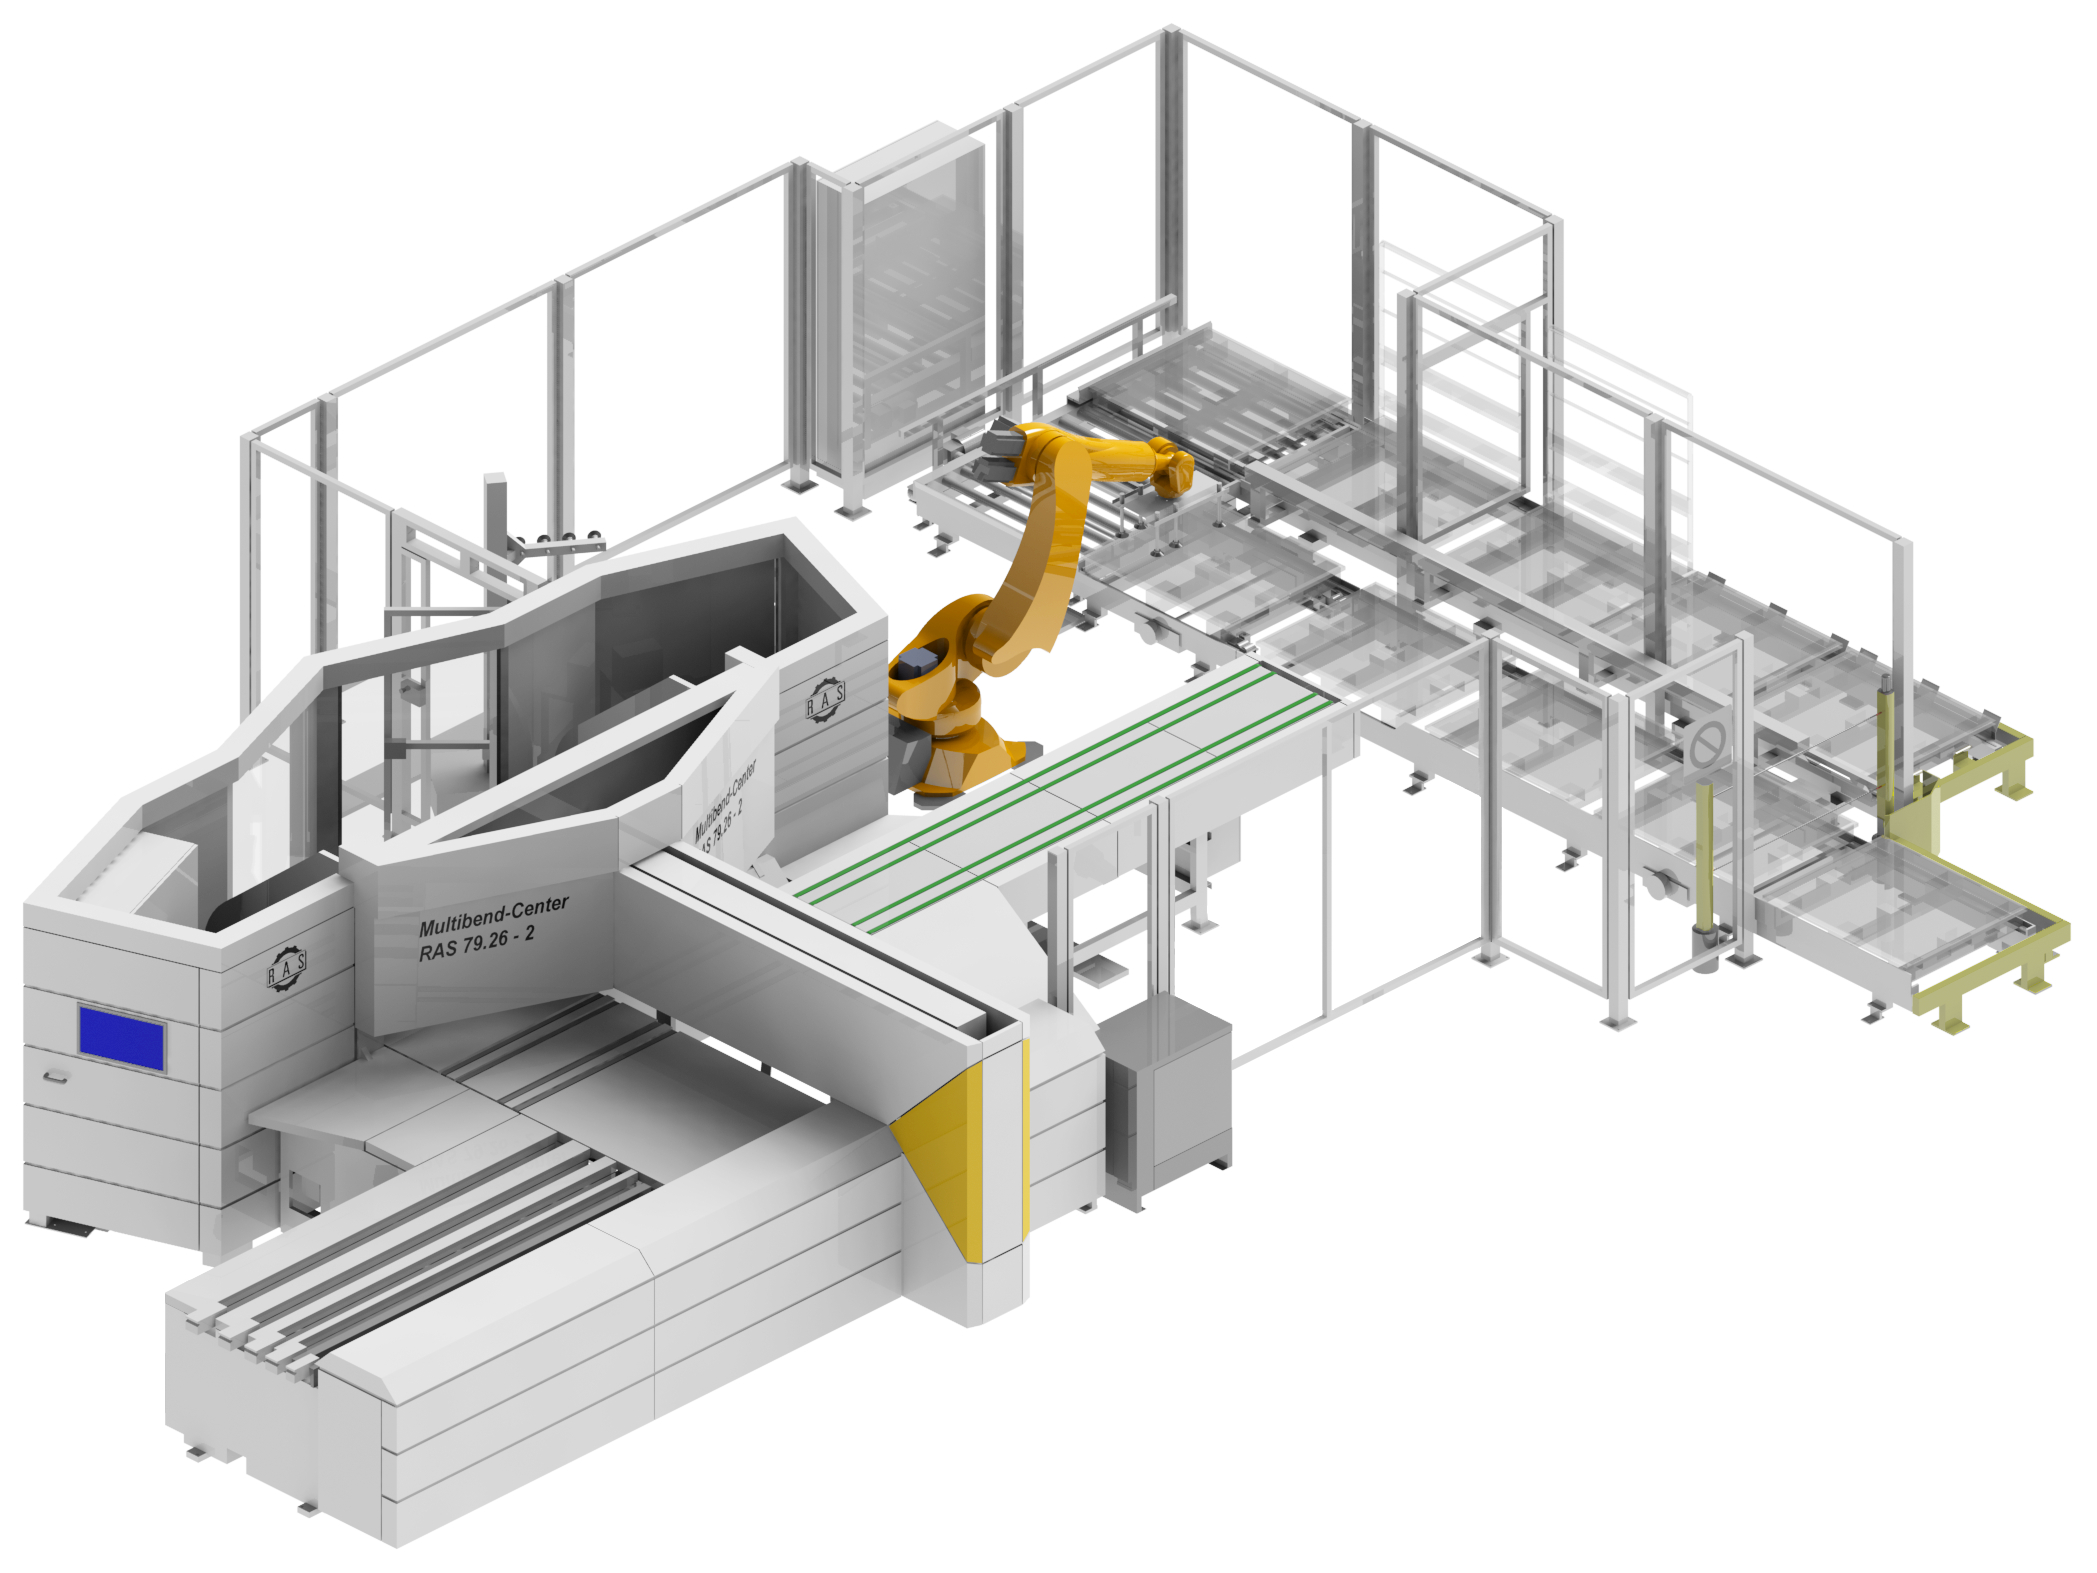 Automatic unloading and stacking of bent parts with an unloading robot. U-shaped pallet station. Horizontal and vertical stacking.